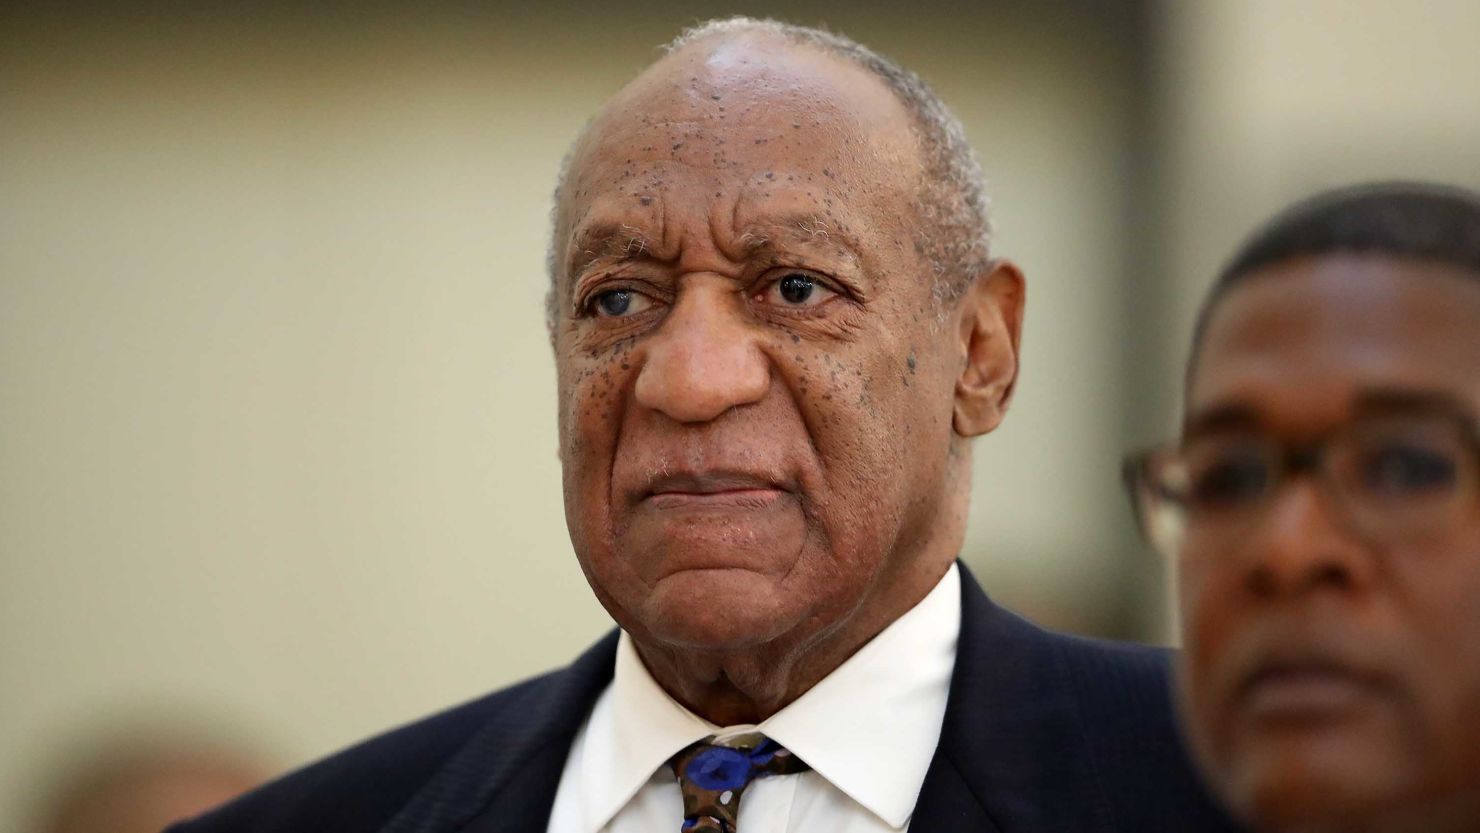 Actor and comedian Bill Cosby has been ordered to pay a $6.7 million bill for legal fees that piled up during his defense against claims of sexual assault.